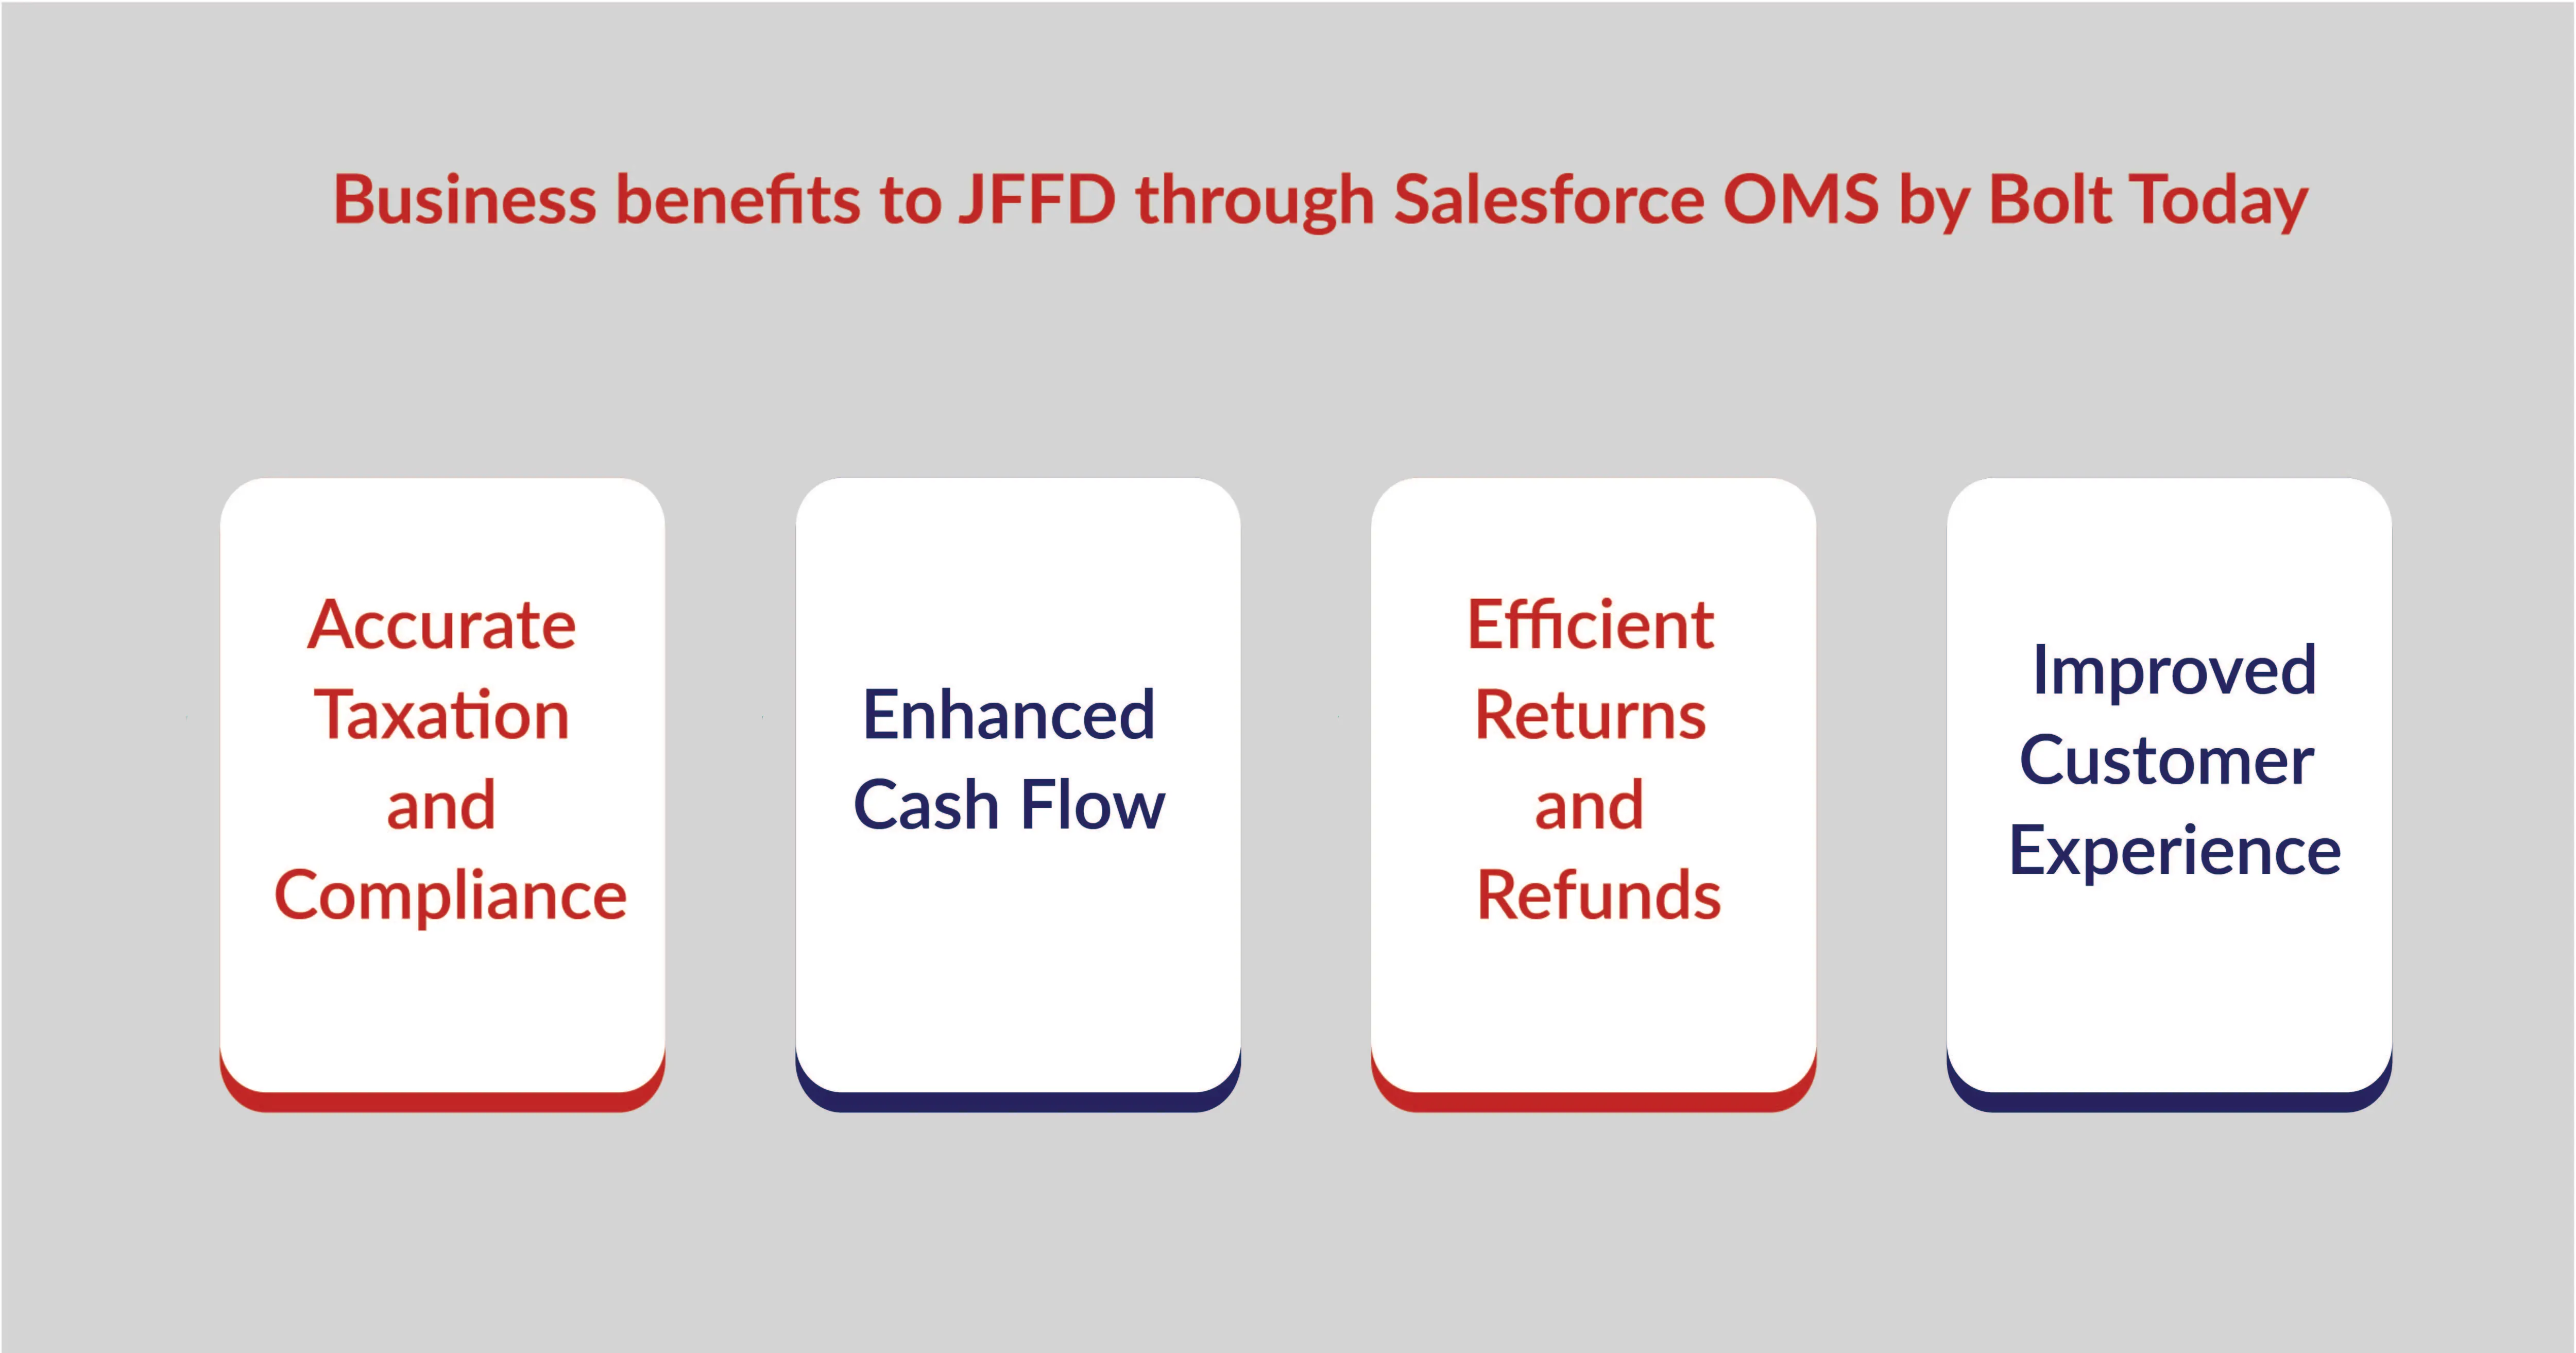 Business benefits to JFFD through Salesforce OMS